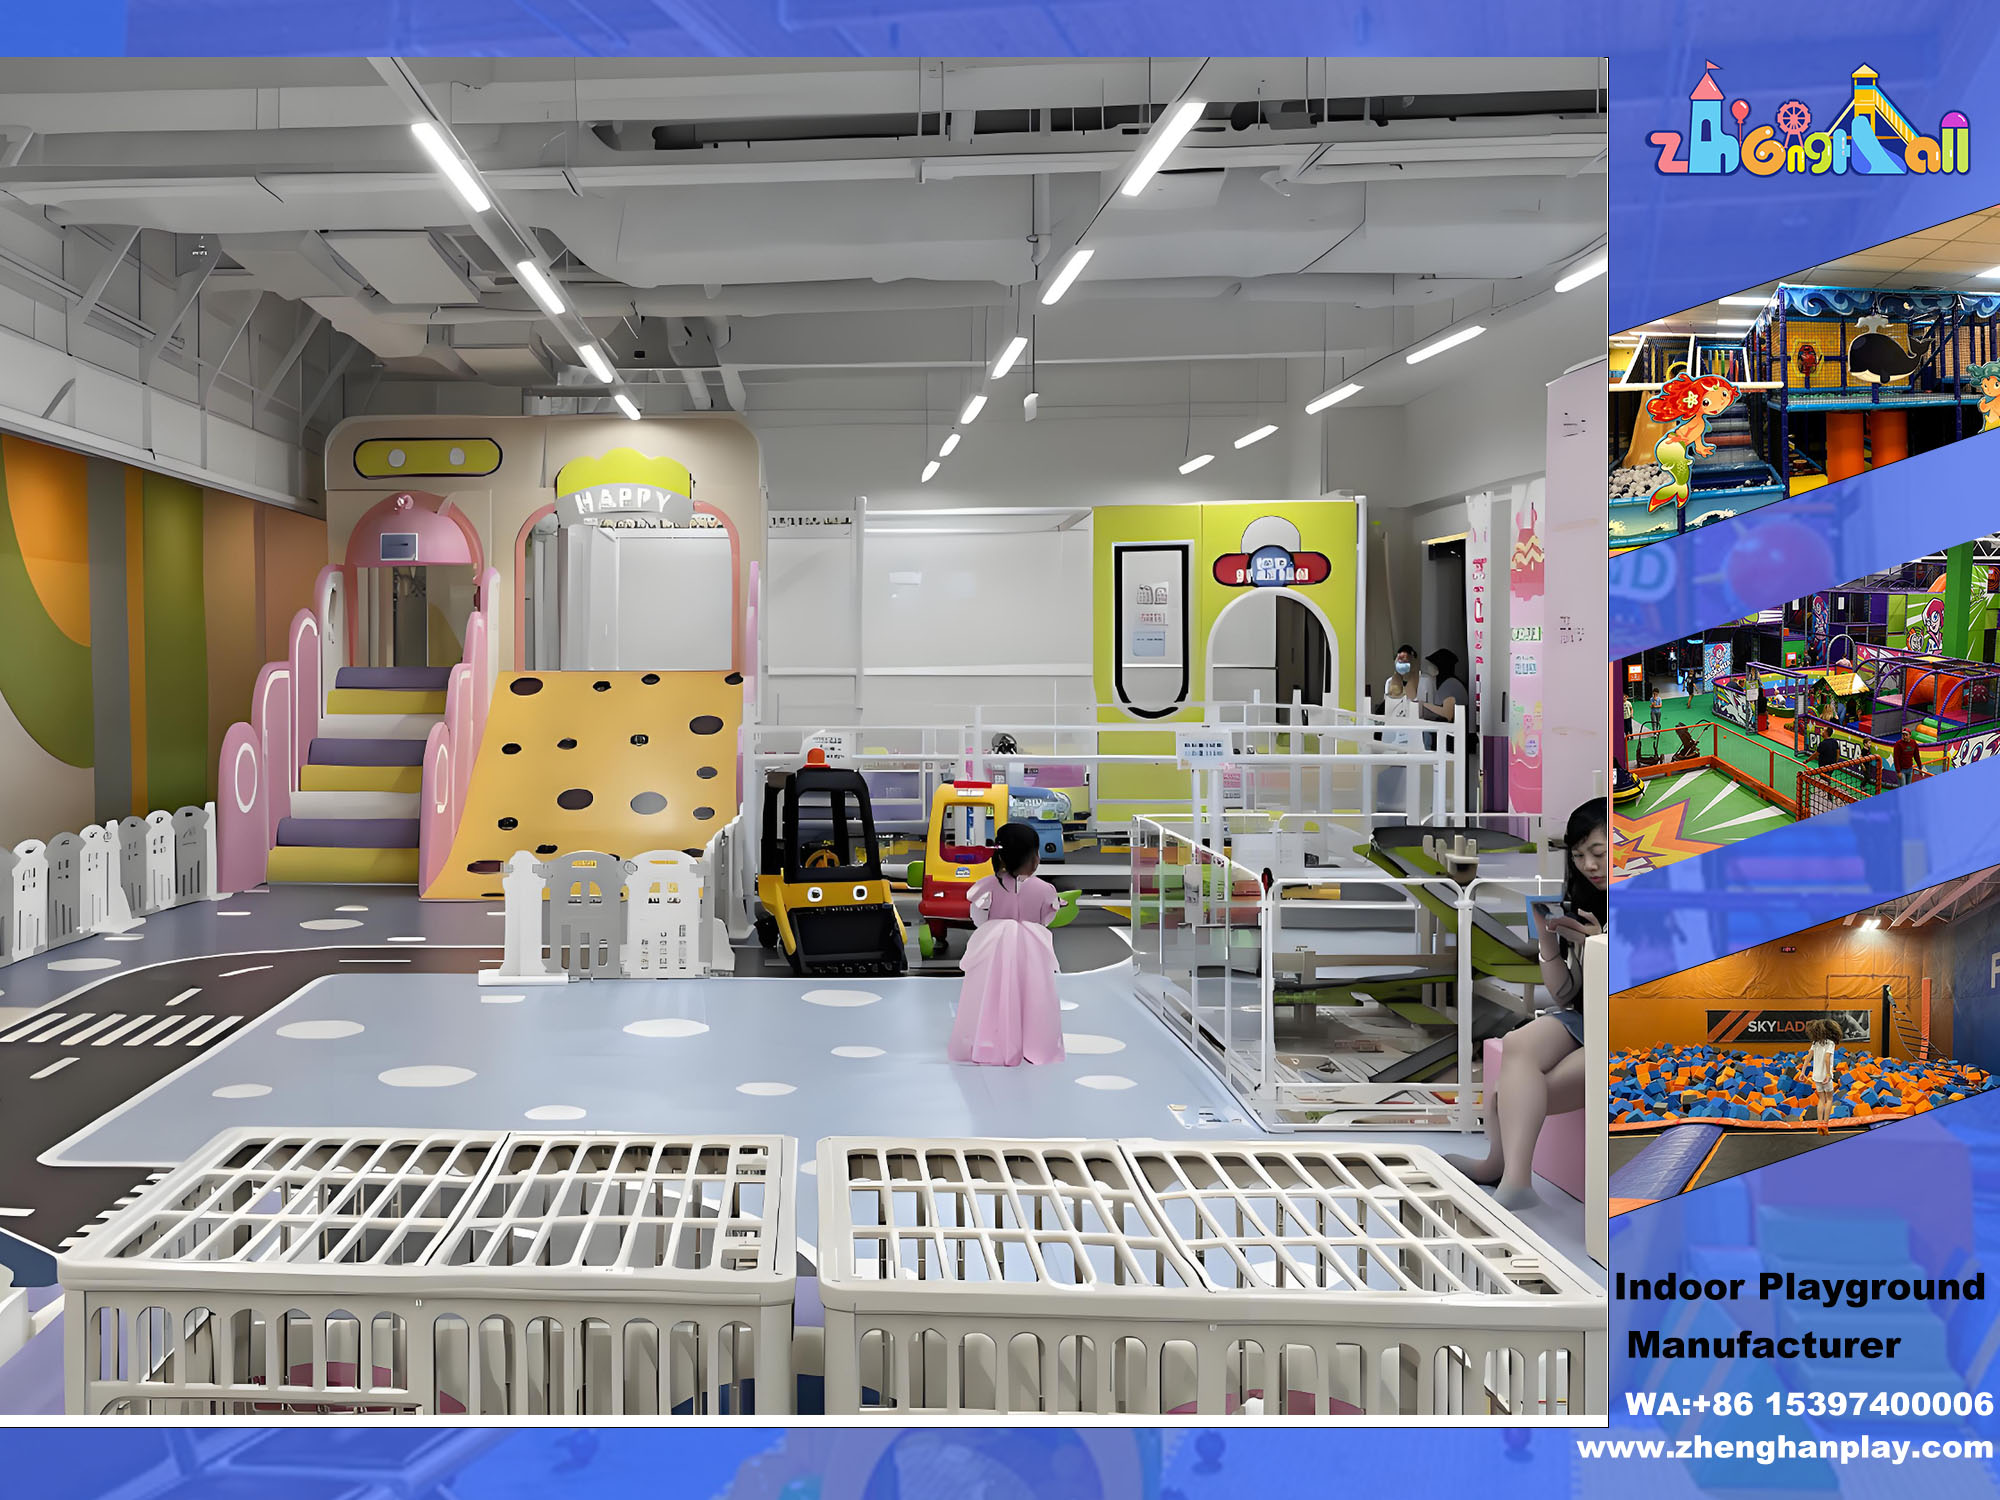 A World Of Colorful Adventures in A Children's Indoor playground 